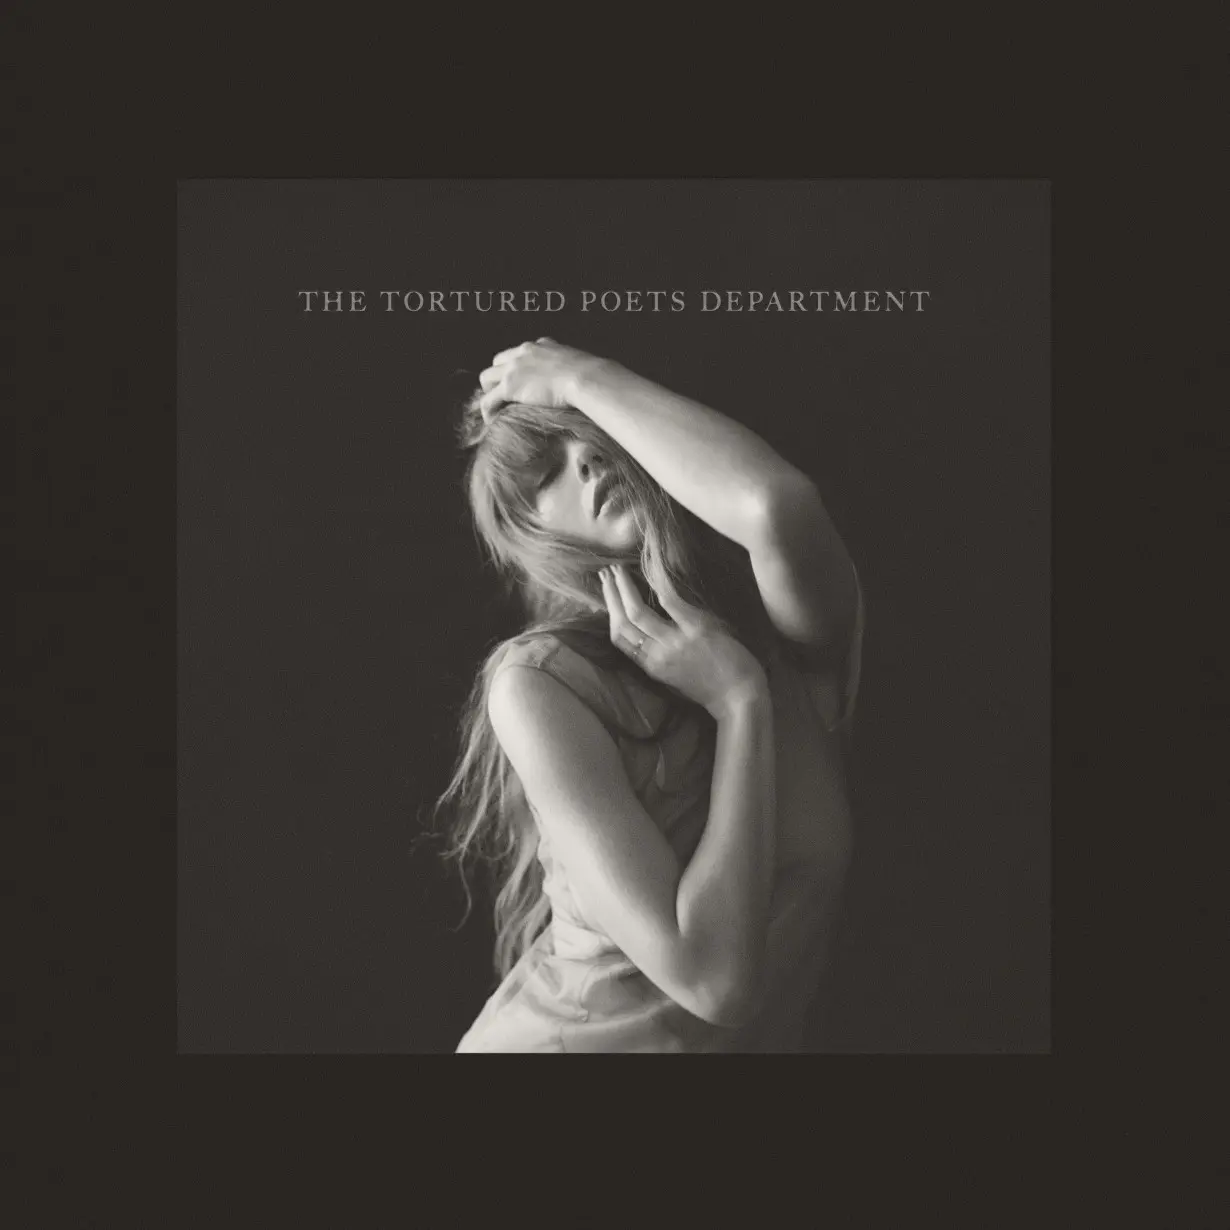 LA Post: Taylor Swift drops 15 new songs on double album, 'The Tortured Poets Department: The Anthology'